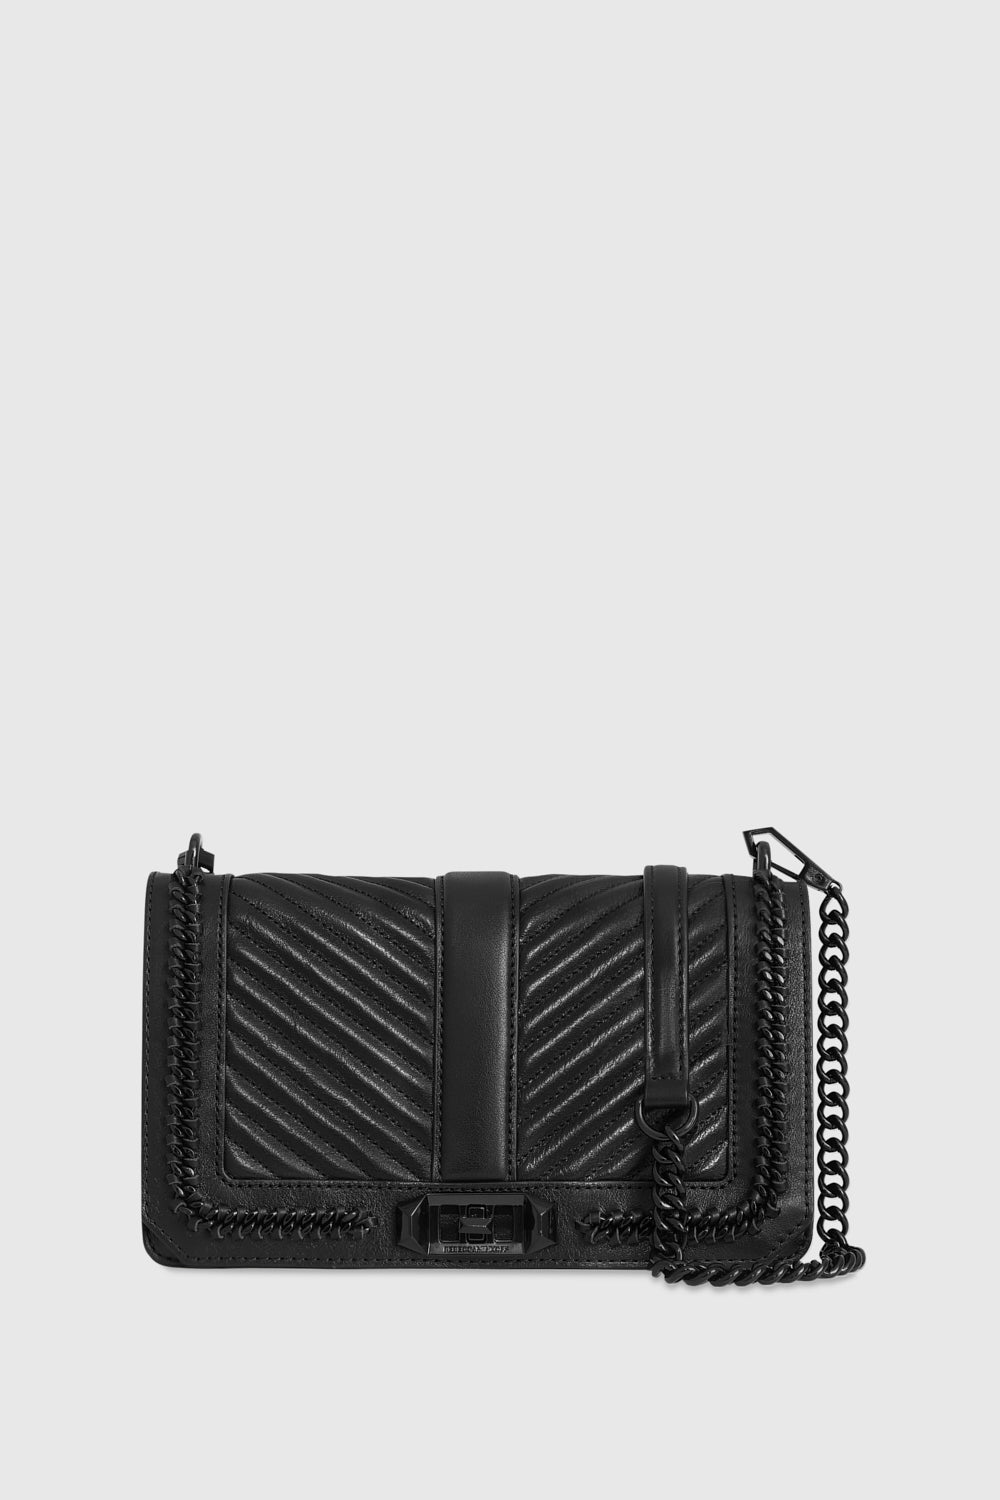 Rebecca Minkoff Chevron Quilted Love Crossbody With Chain Inset Bag In Black/Black Shellac